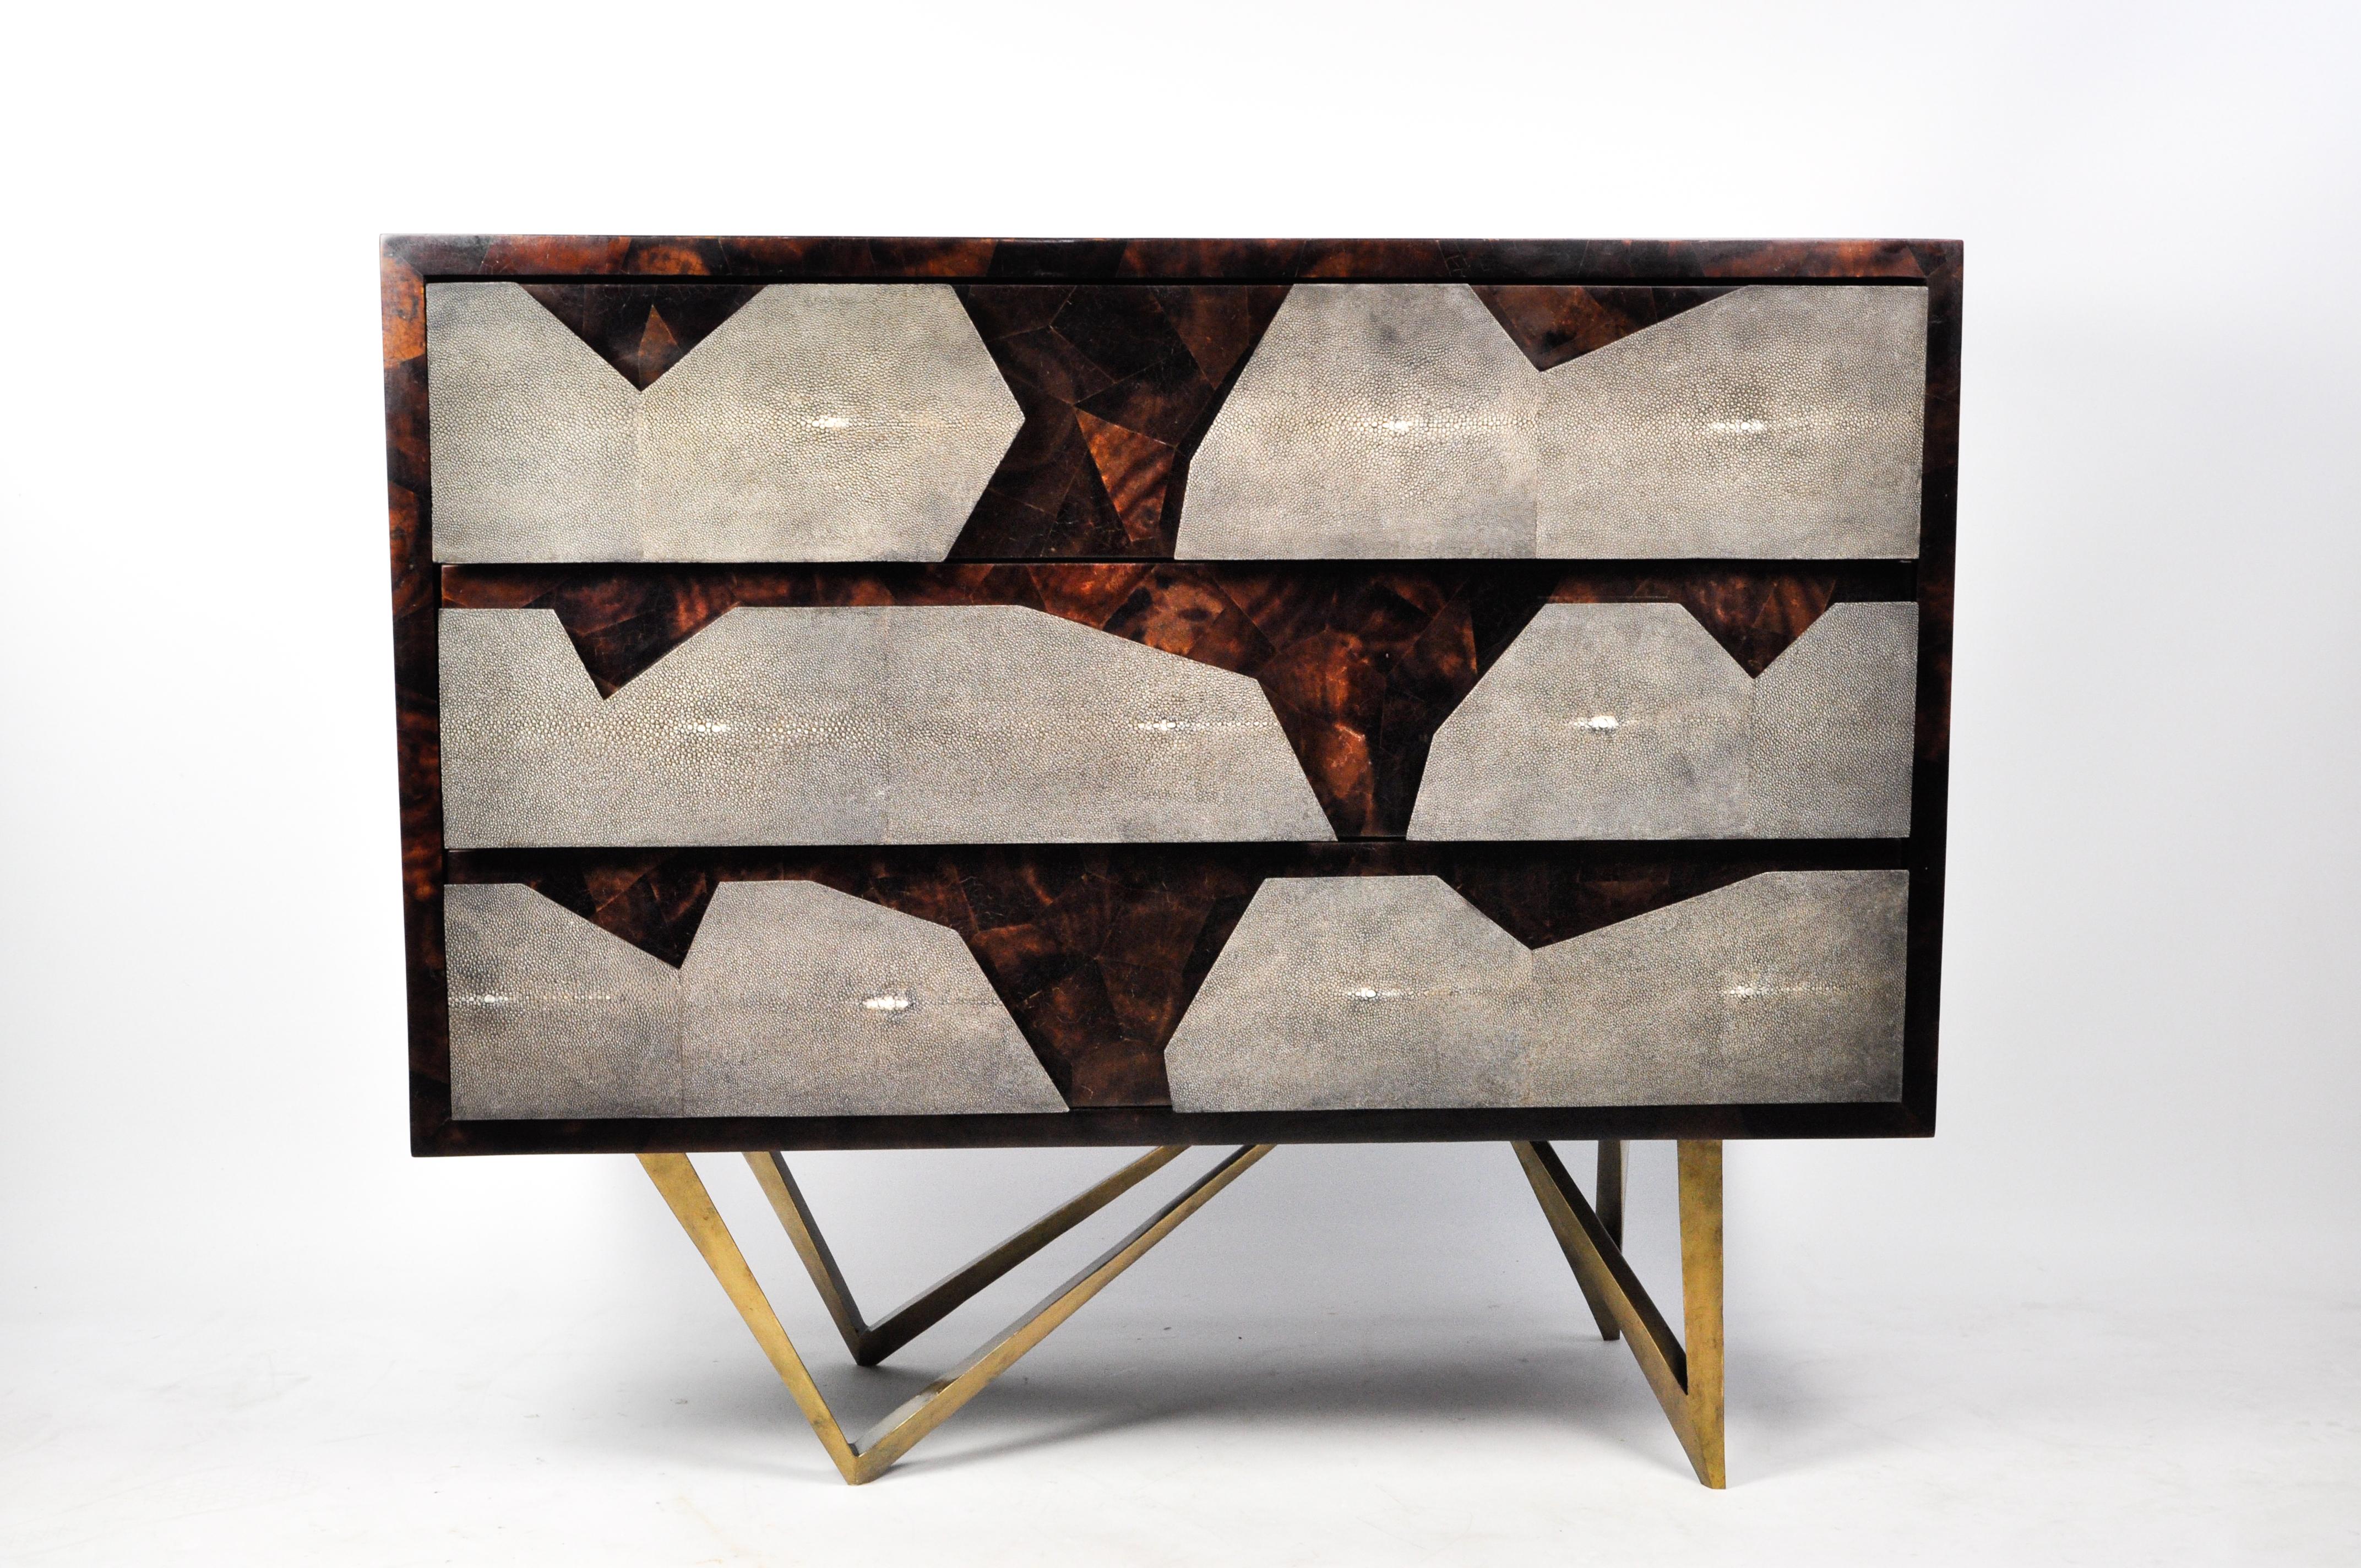 The REEF 3 drawer dresser is made of sea shell marquetry with shagreen decor on the front of the drawers.
The legs have an old brass patina.
The interior of the drawers are in black veneer.

The dimensions of this dresser are 39.37